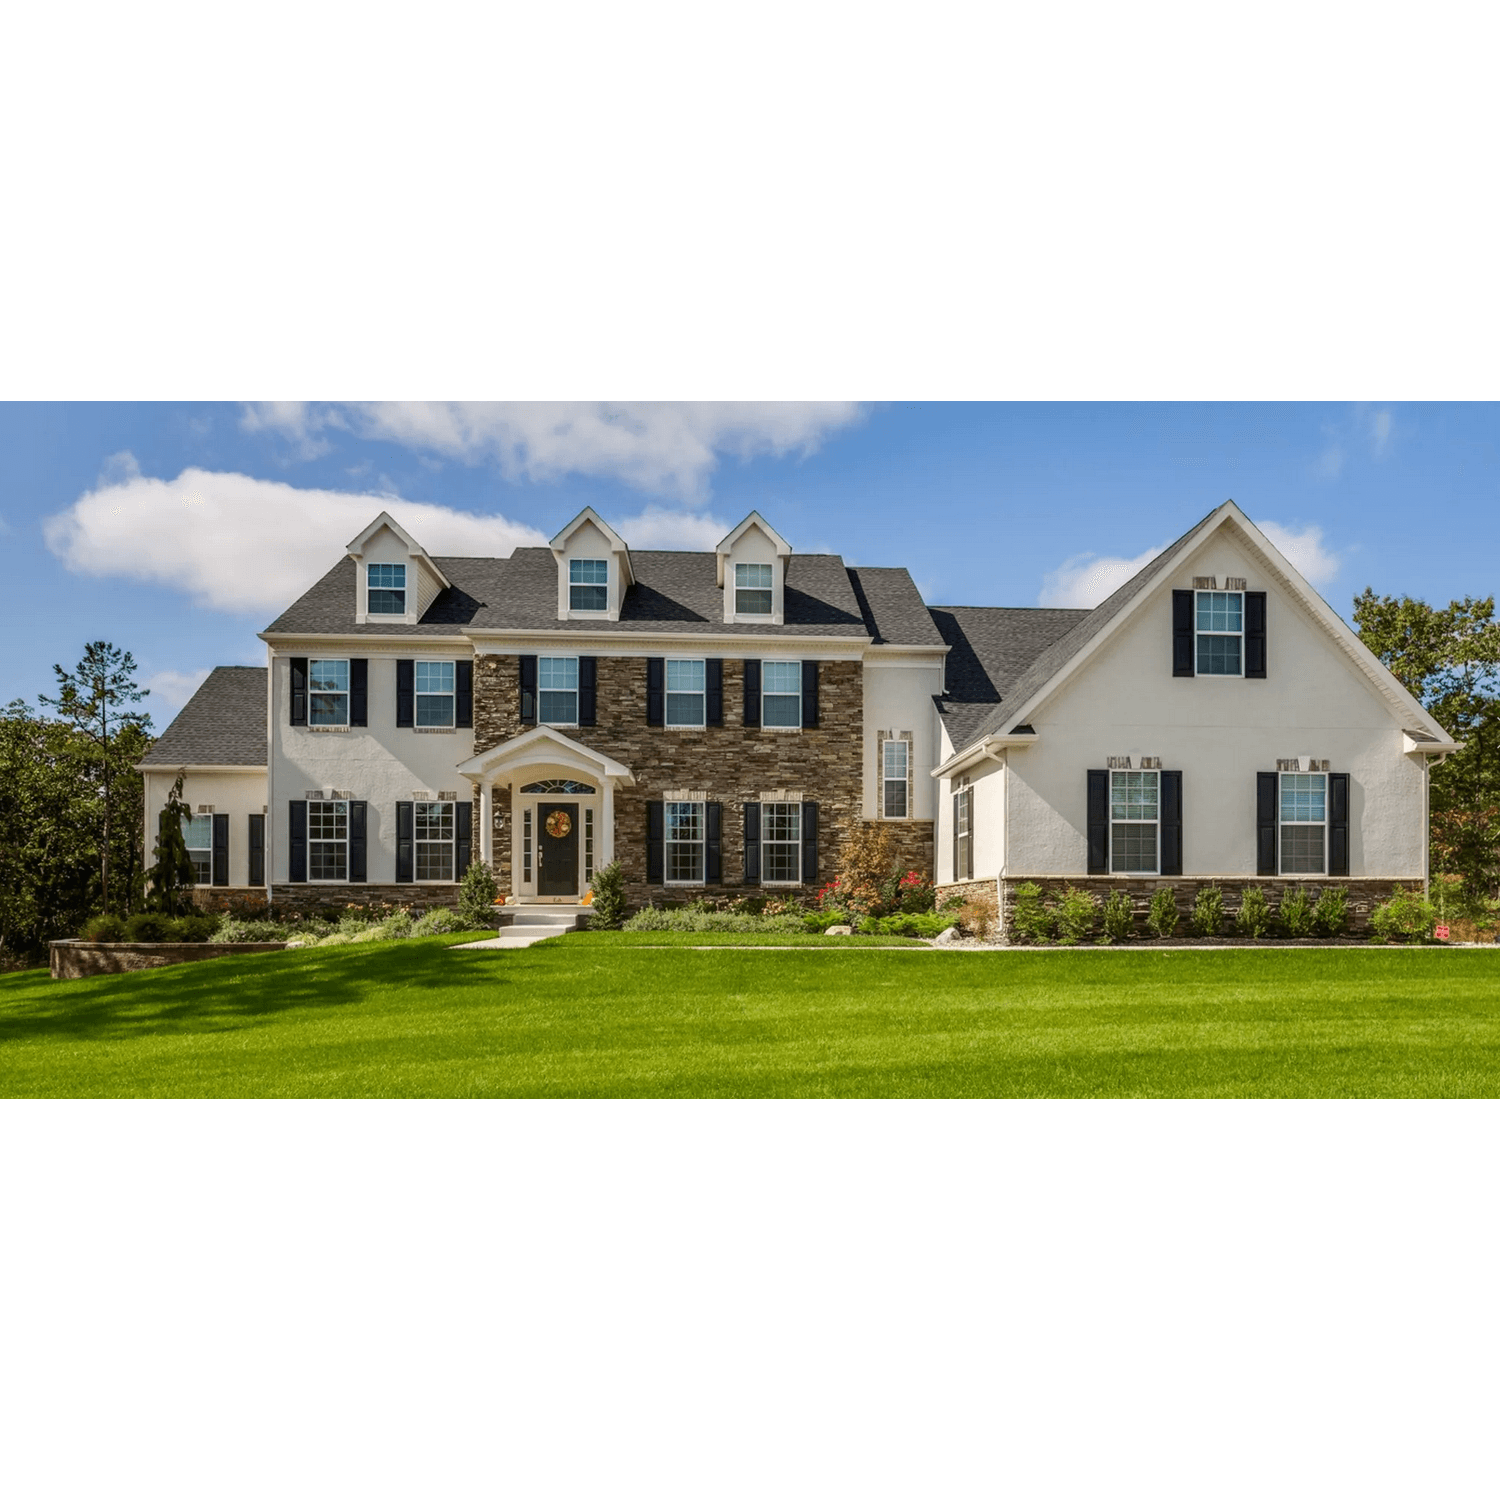 The Reserve at Brookside Farms building at Balis Drive, Mullica Hill, NJ 08062